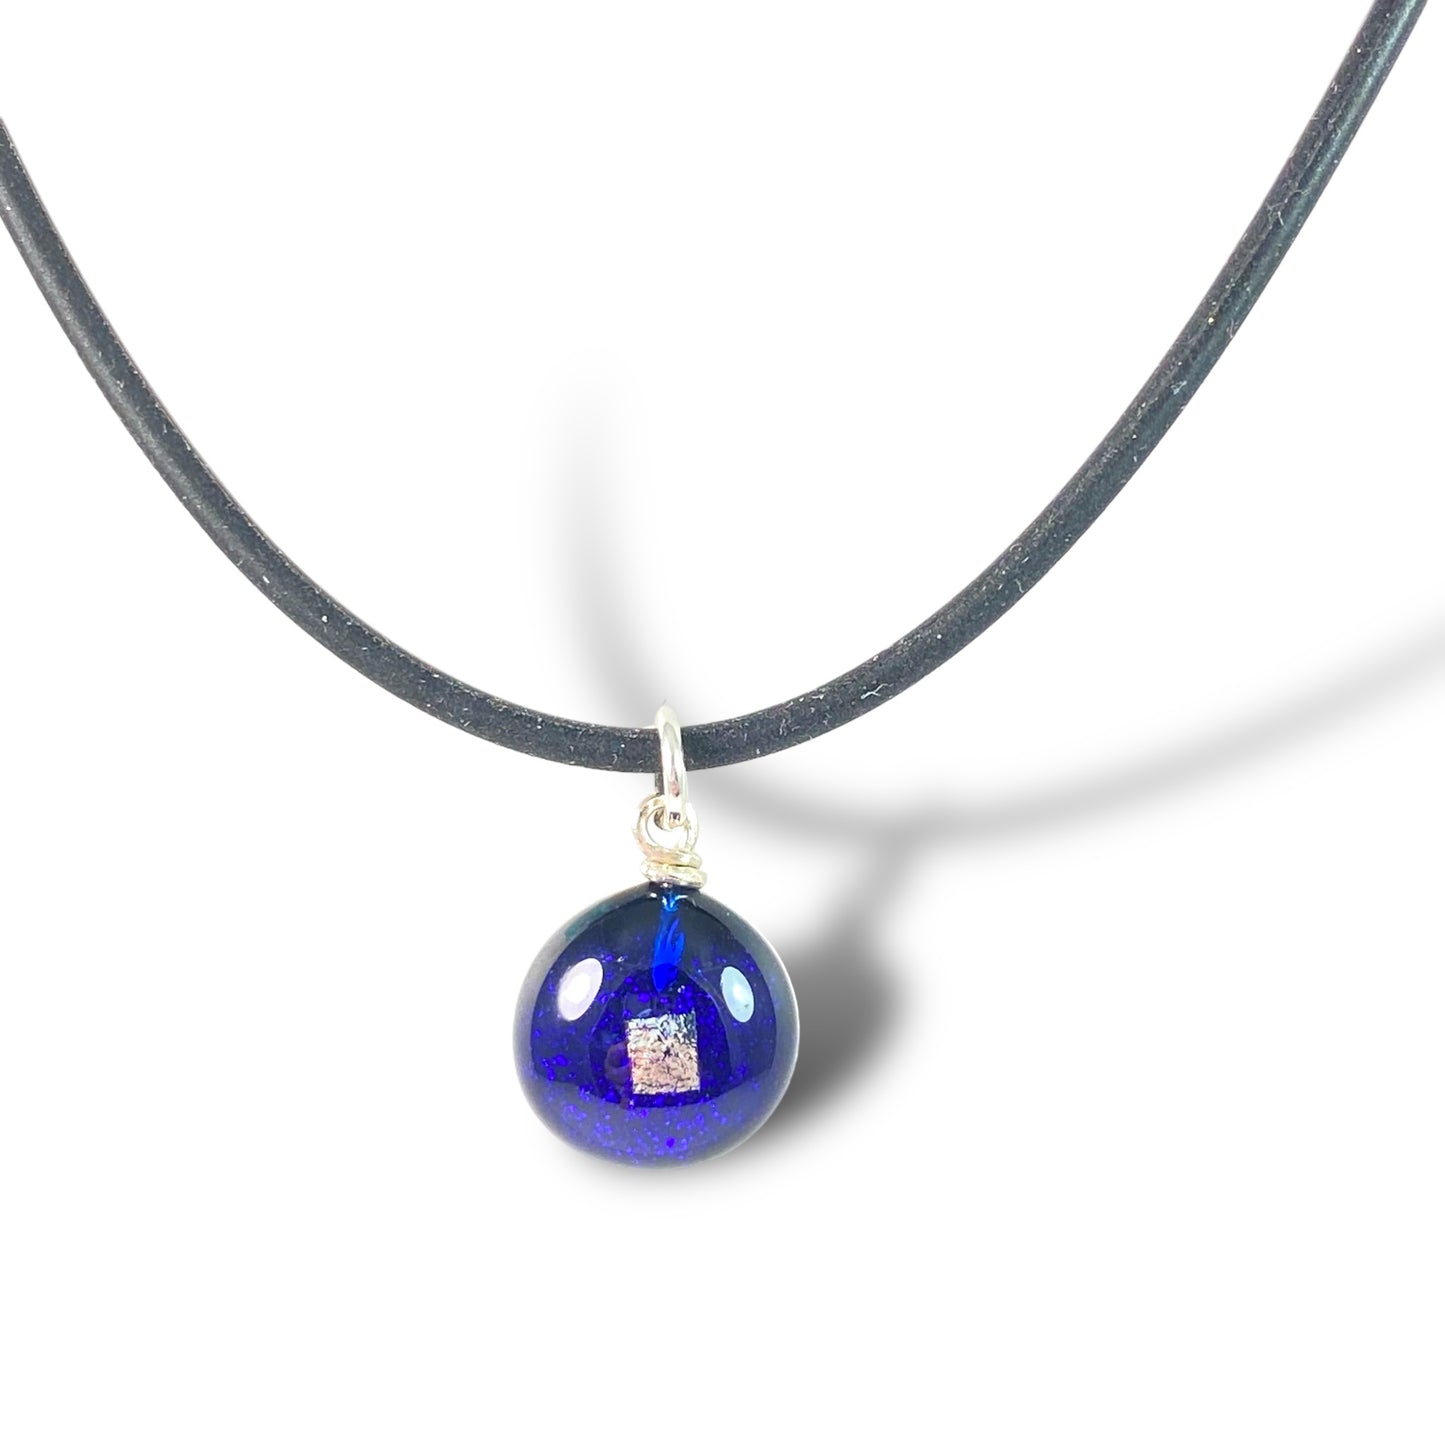 Space Ball Necklace in Cobalt Blue